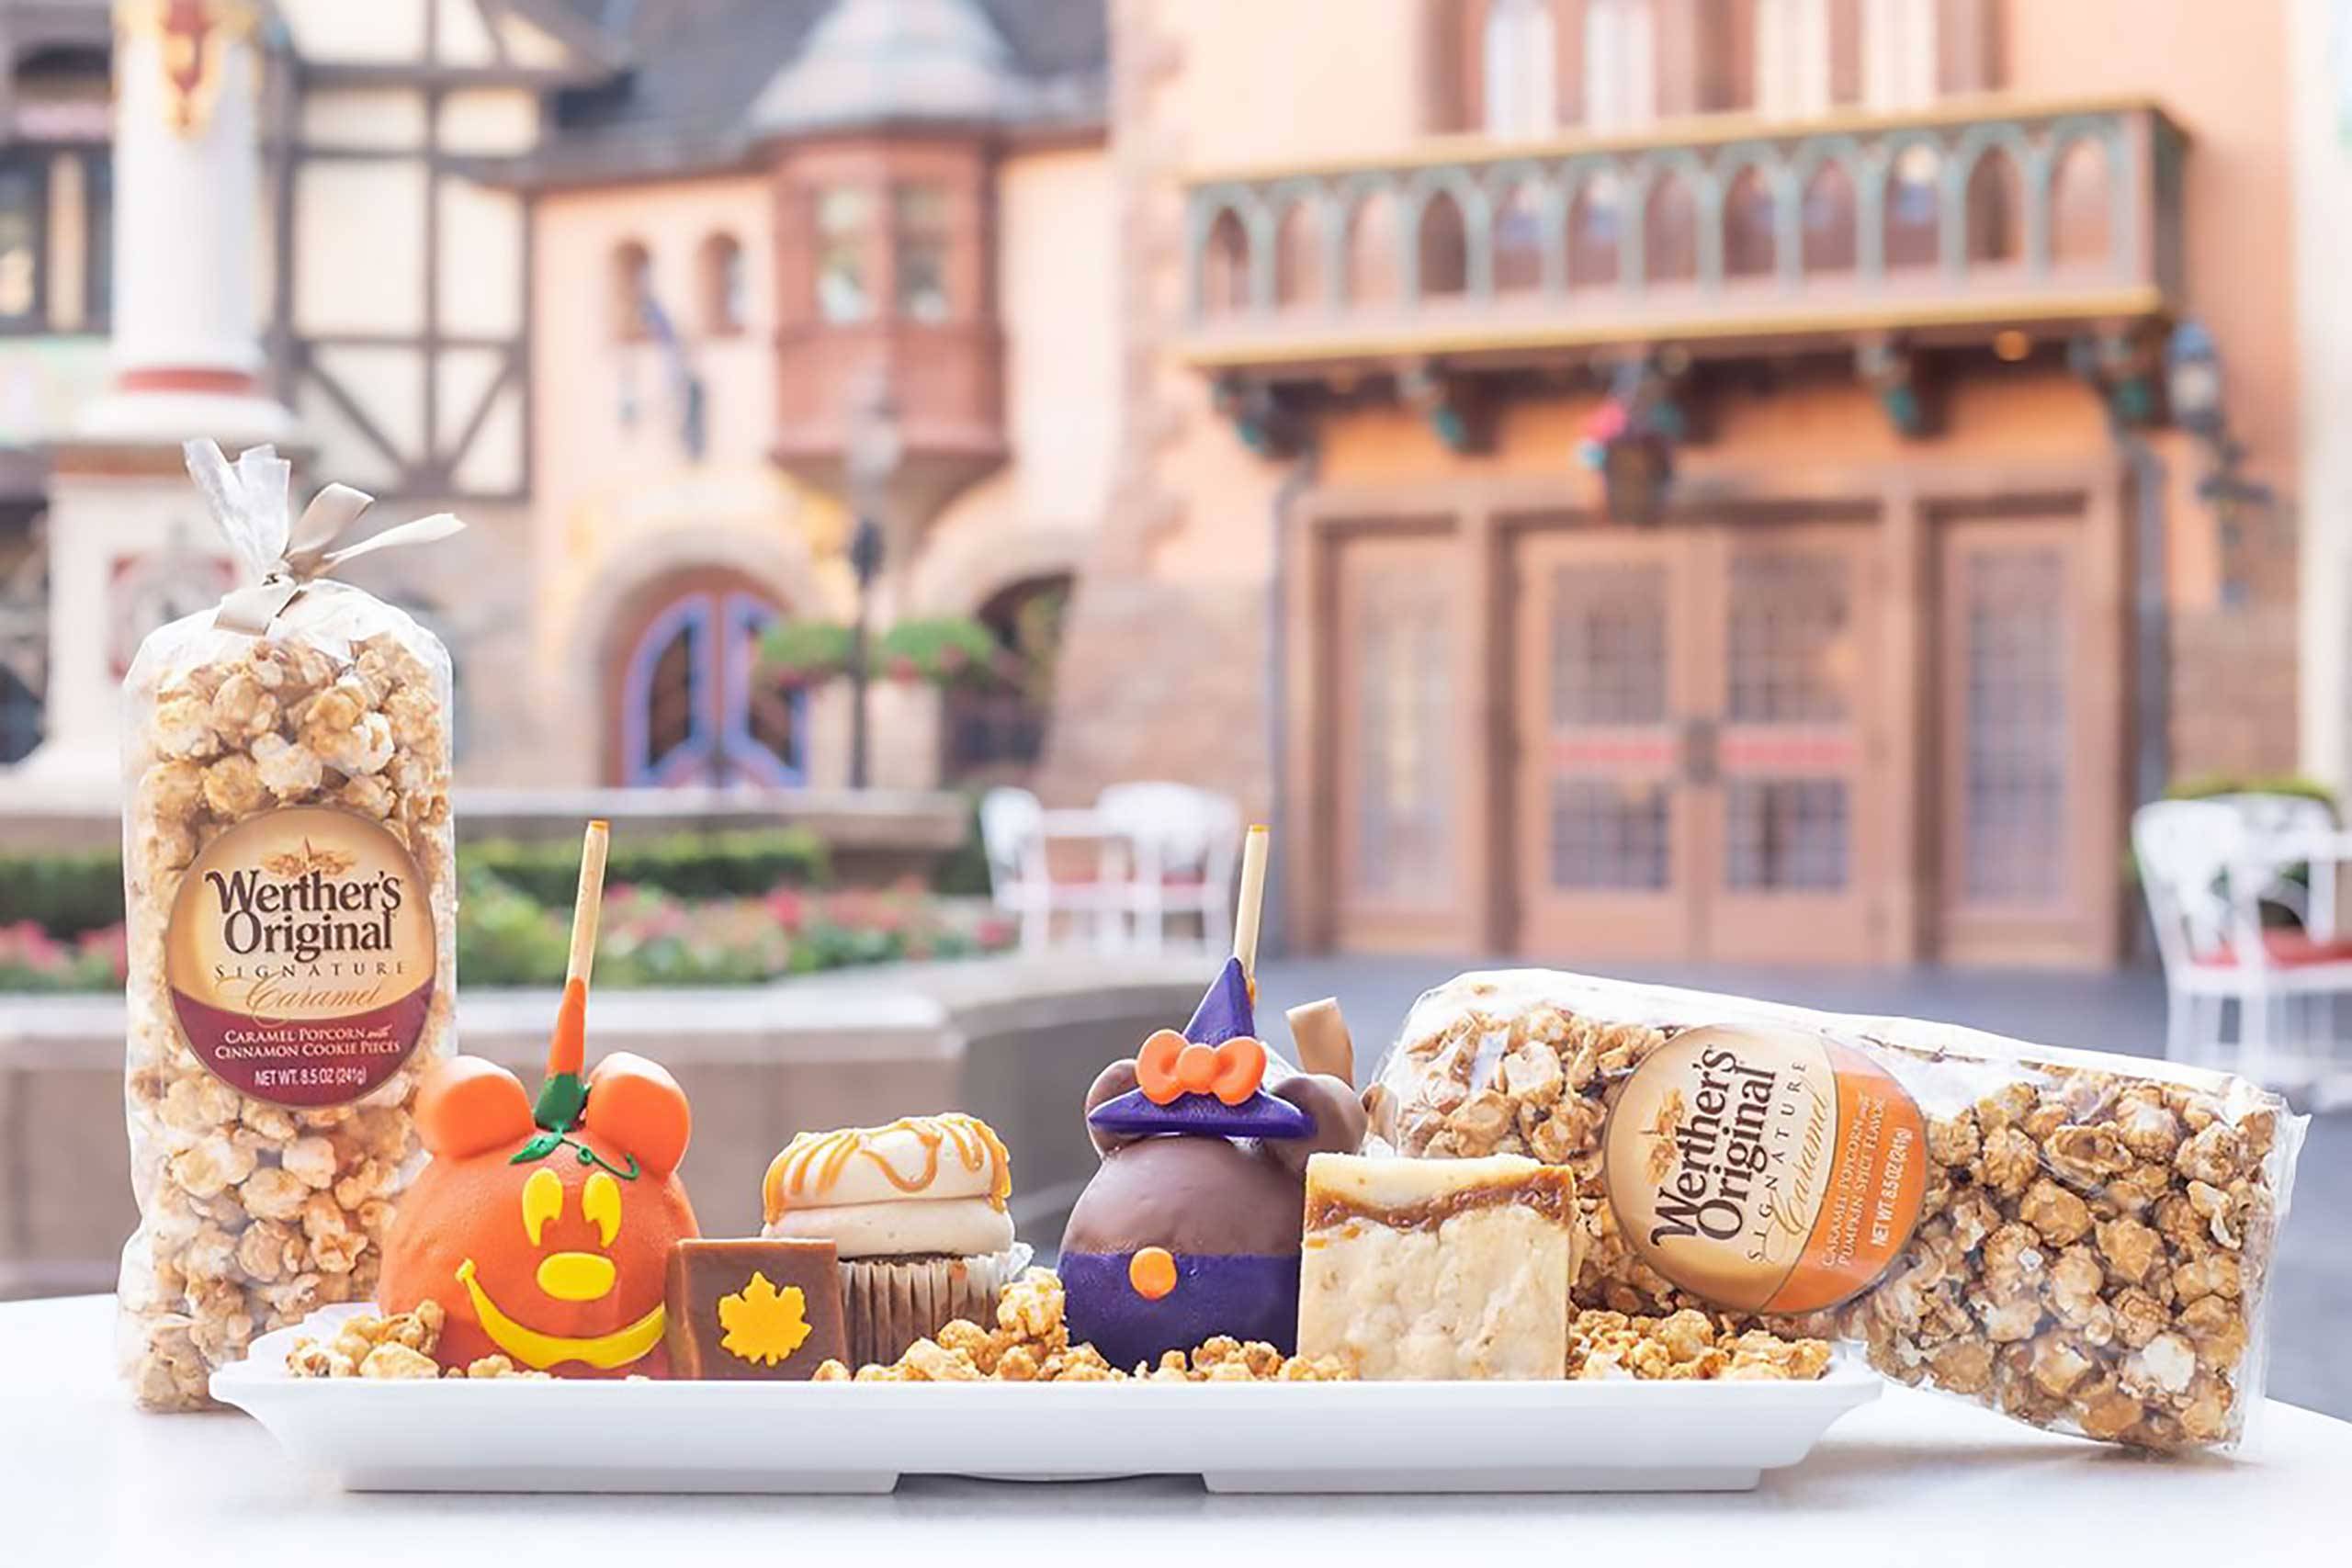 EPCOT rolls out fall favorites with Werther's Original